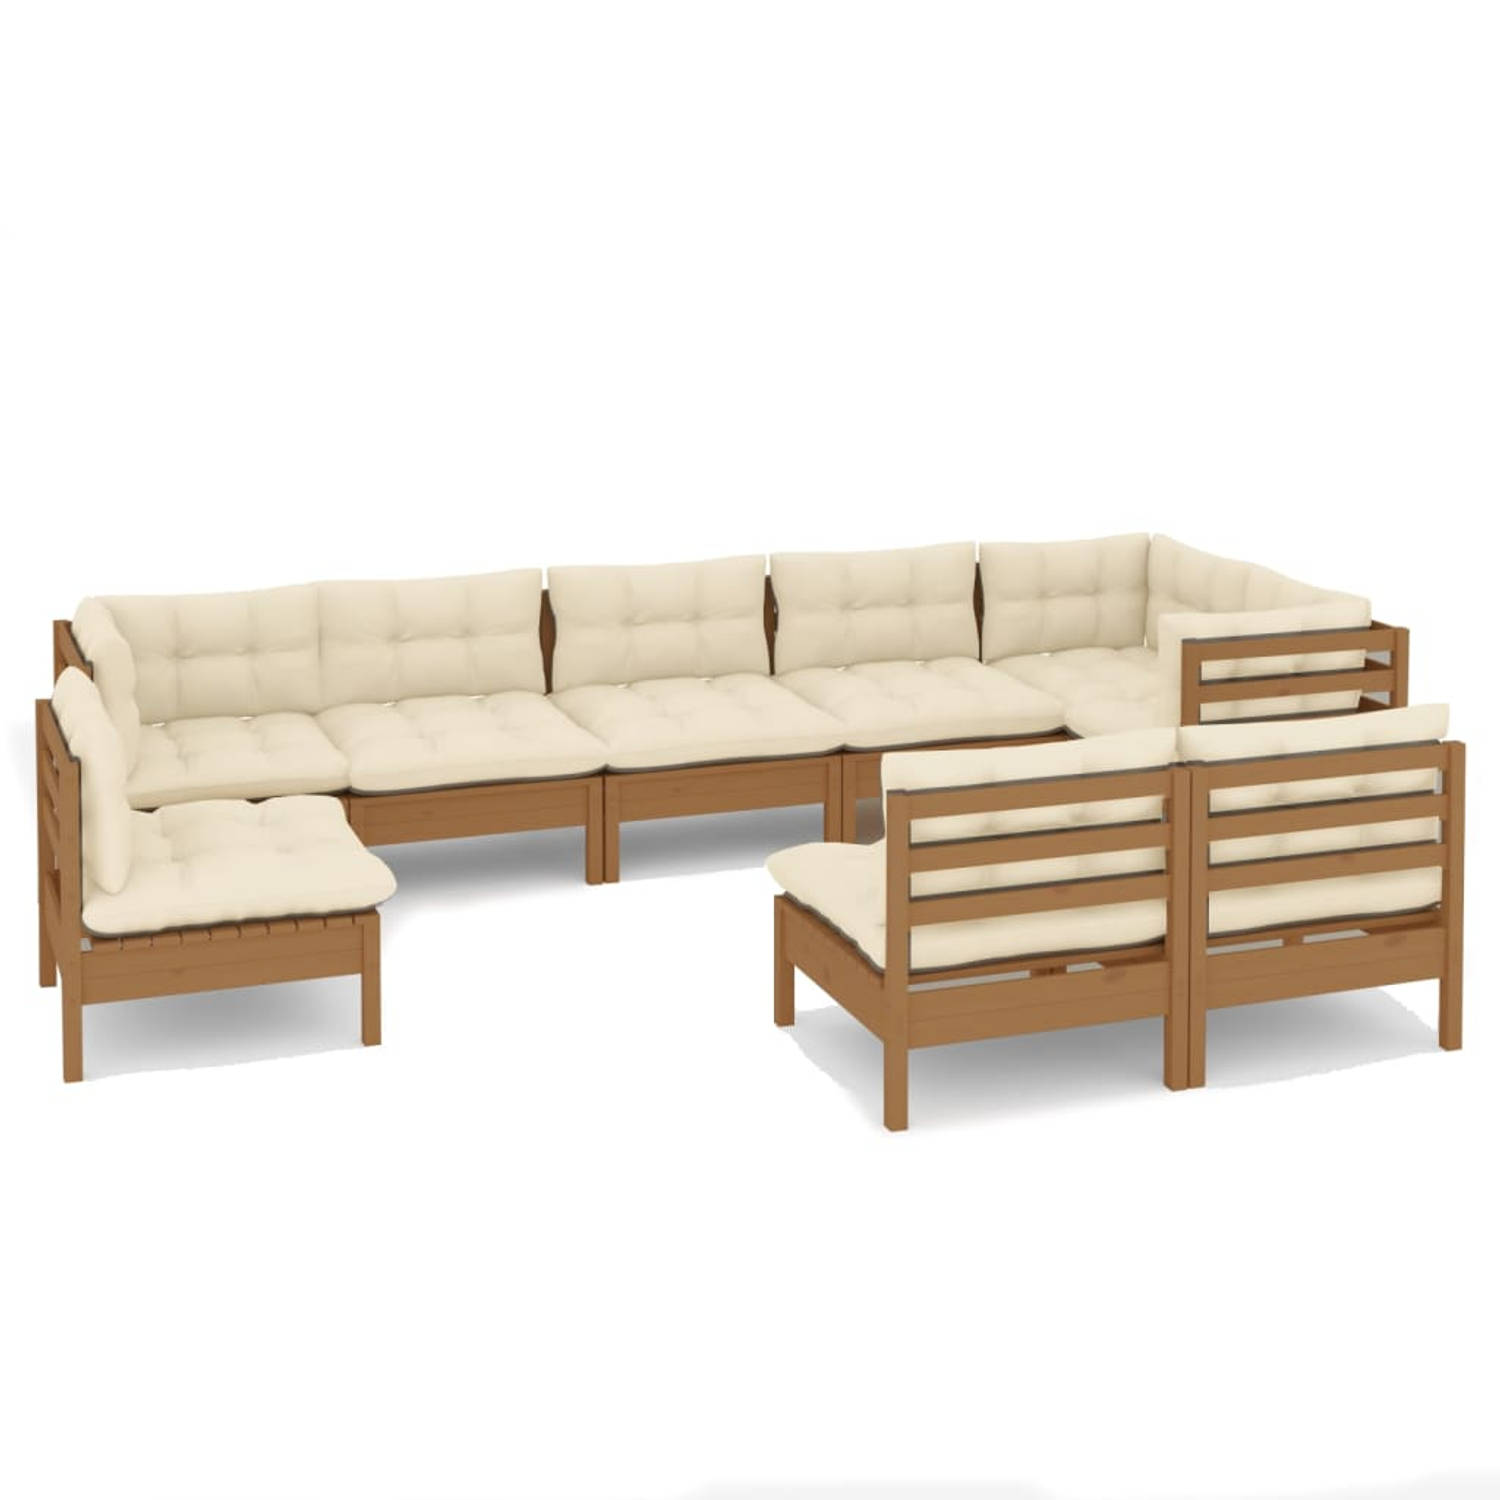 The Living Store Loungeset - Honingbruin - Grenenhout - Modulair - 63.5 x 63.5 x 62.5 cm - Inclusief kussens